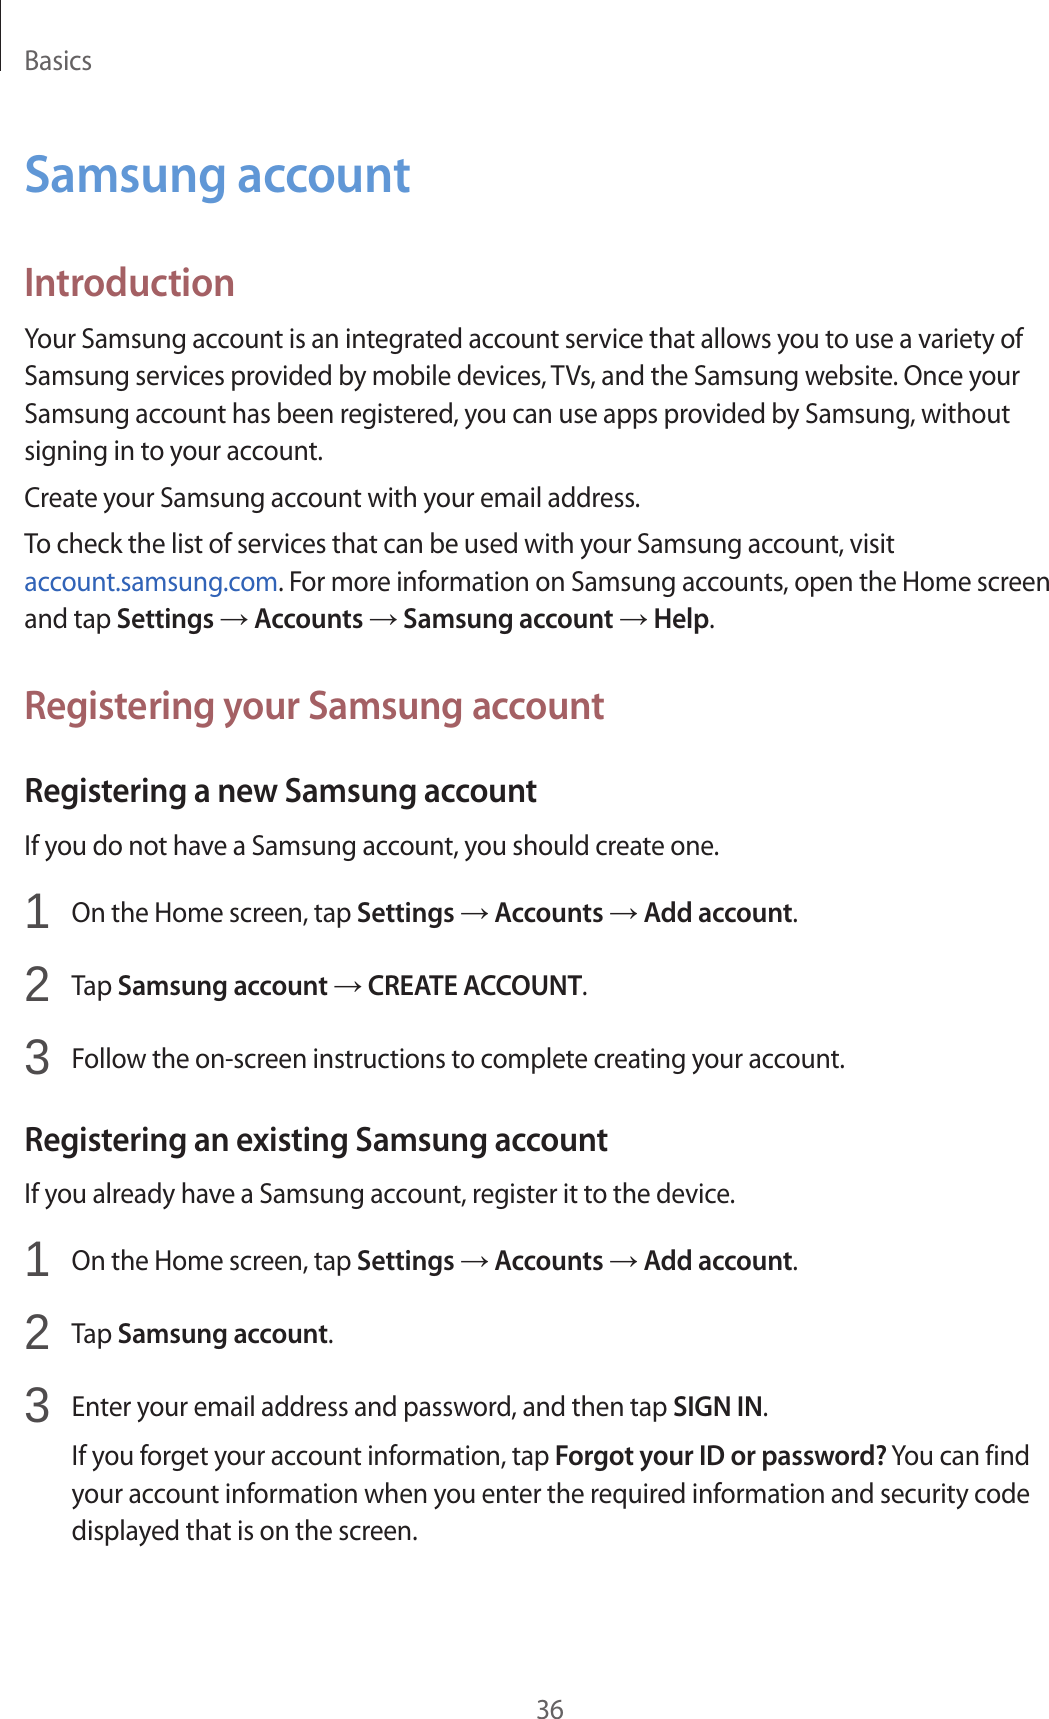 Basics36Samsung accountIntroductionYour Samsung account is an integrated account service that allows you to use a variety of Samsung services provided by mobile devices, TVs, and the Samsung website. Once your Samsung account has been registered, you can use apps provided by Samsung, without signing in to your account.Create your Samsung account with your email address.To check the list of services that can be used with your Samsung account, visit account.samsung.com. For more information on Samsung accounts, open the Home screen and tap Settings → Accounts → Samsung account → Help.Registering your Samsung accountRegistering a new Samsung accountIf you do not have a Samsung account, you should create one.1  On the Home screen, tap Settings → Accounts → Add account.2  Tap Samsung account → CREATE ACCOUNT.3  Follow the on-screen instructions to complete creating your account.Registering an existing Samsung accountIf you already have a Samsung account, register it to the device.1  On the Home screen, tap Settings → Accounts → Add account.2  Tap Samsung account.3  Enter your email address and password, and then tap SIGN IN.If you forget your account information, tap Forgot your ID or password? You can find your account information when you enter the required information and security code displayed that is on the screen.